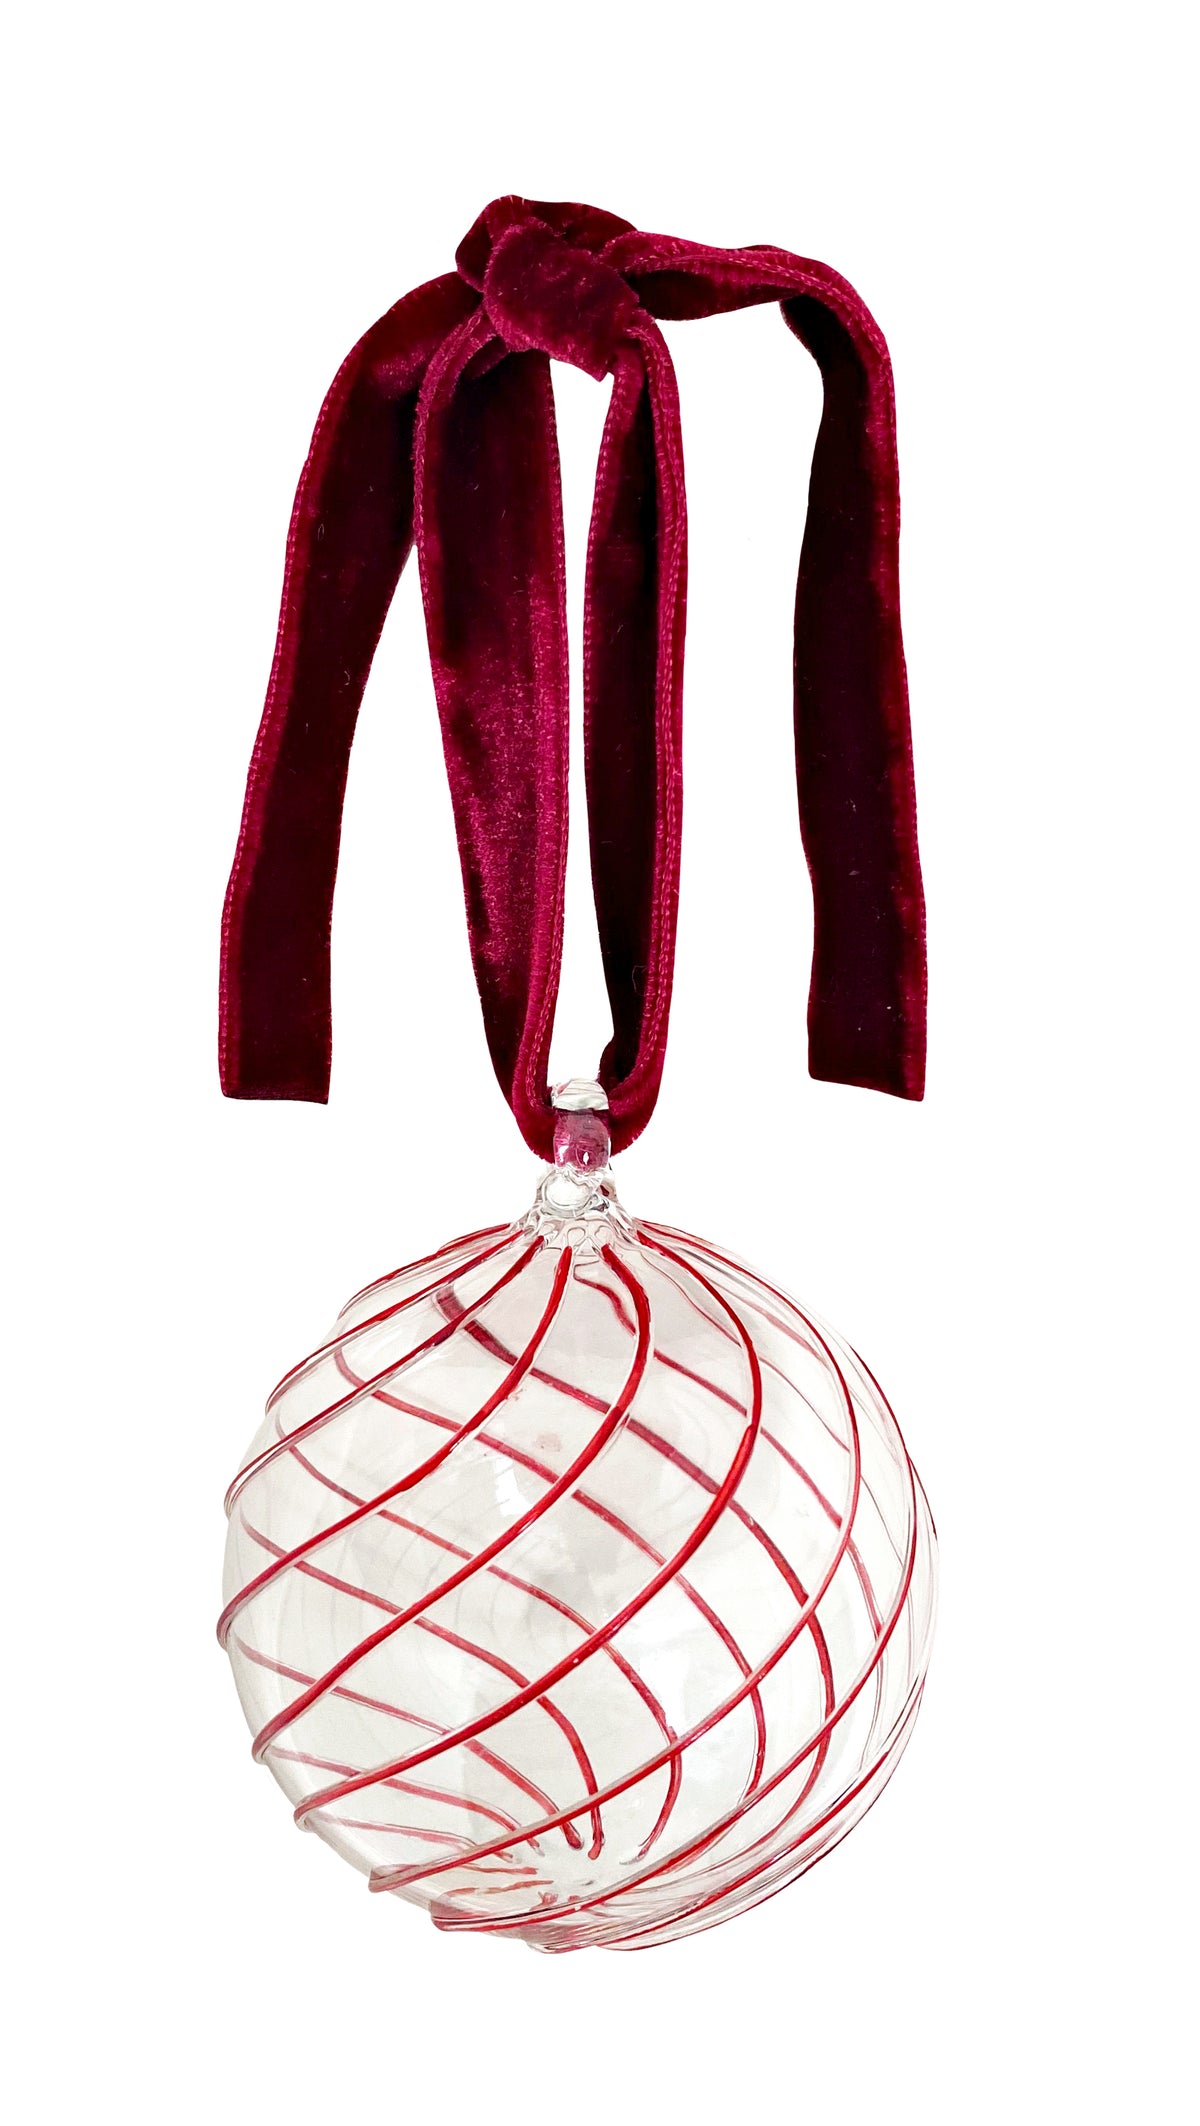 Swirl Glass Bauble in Red